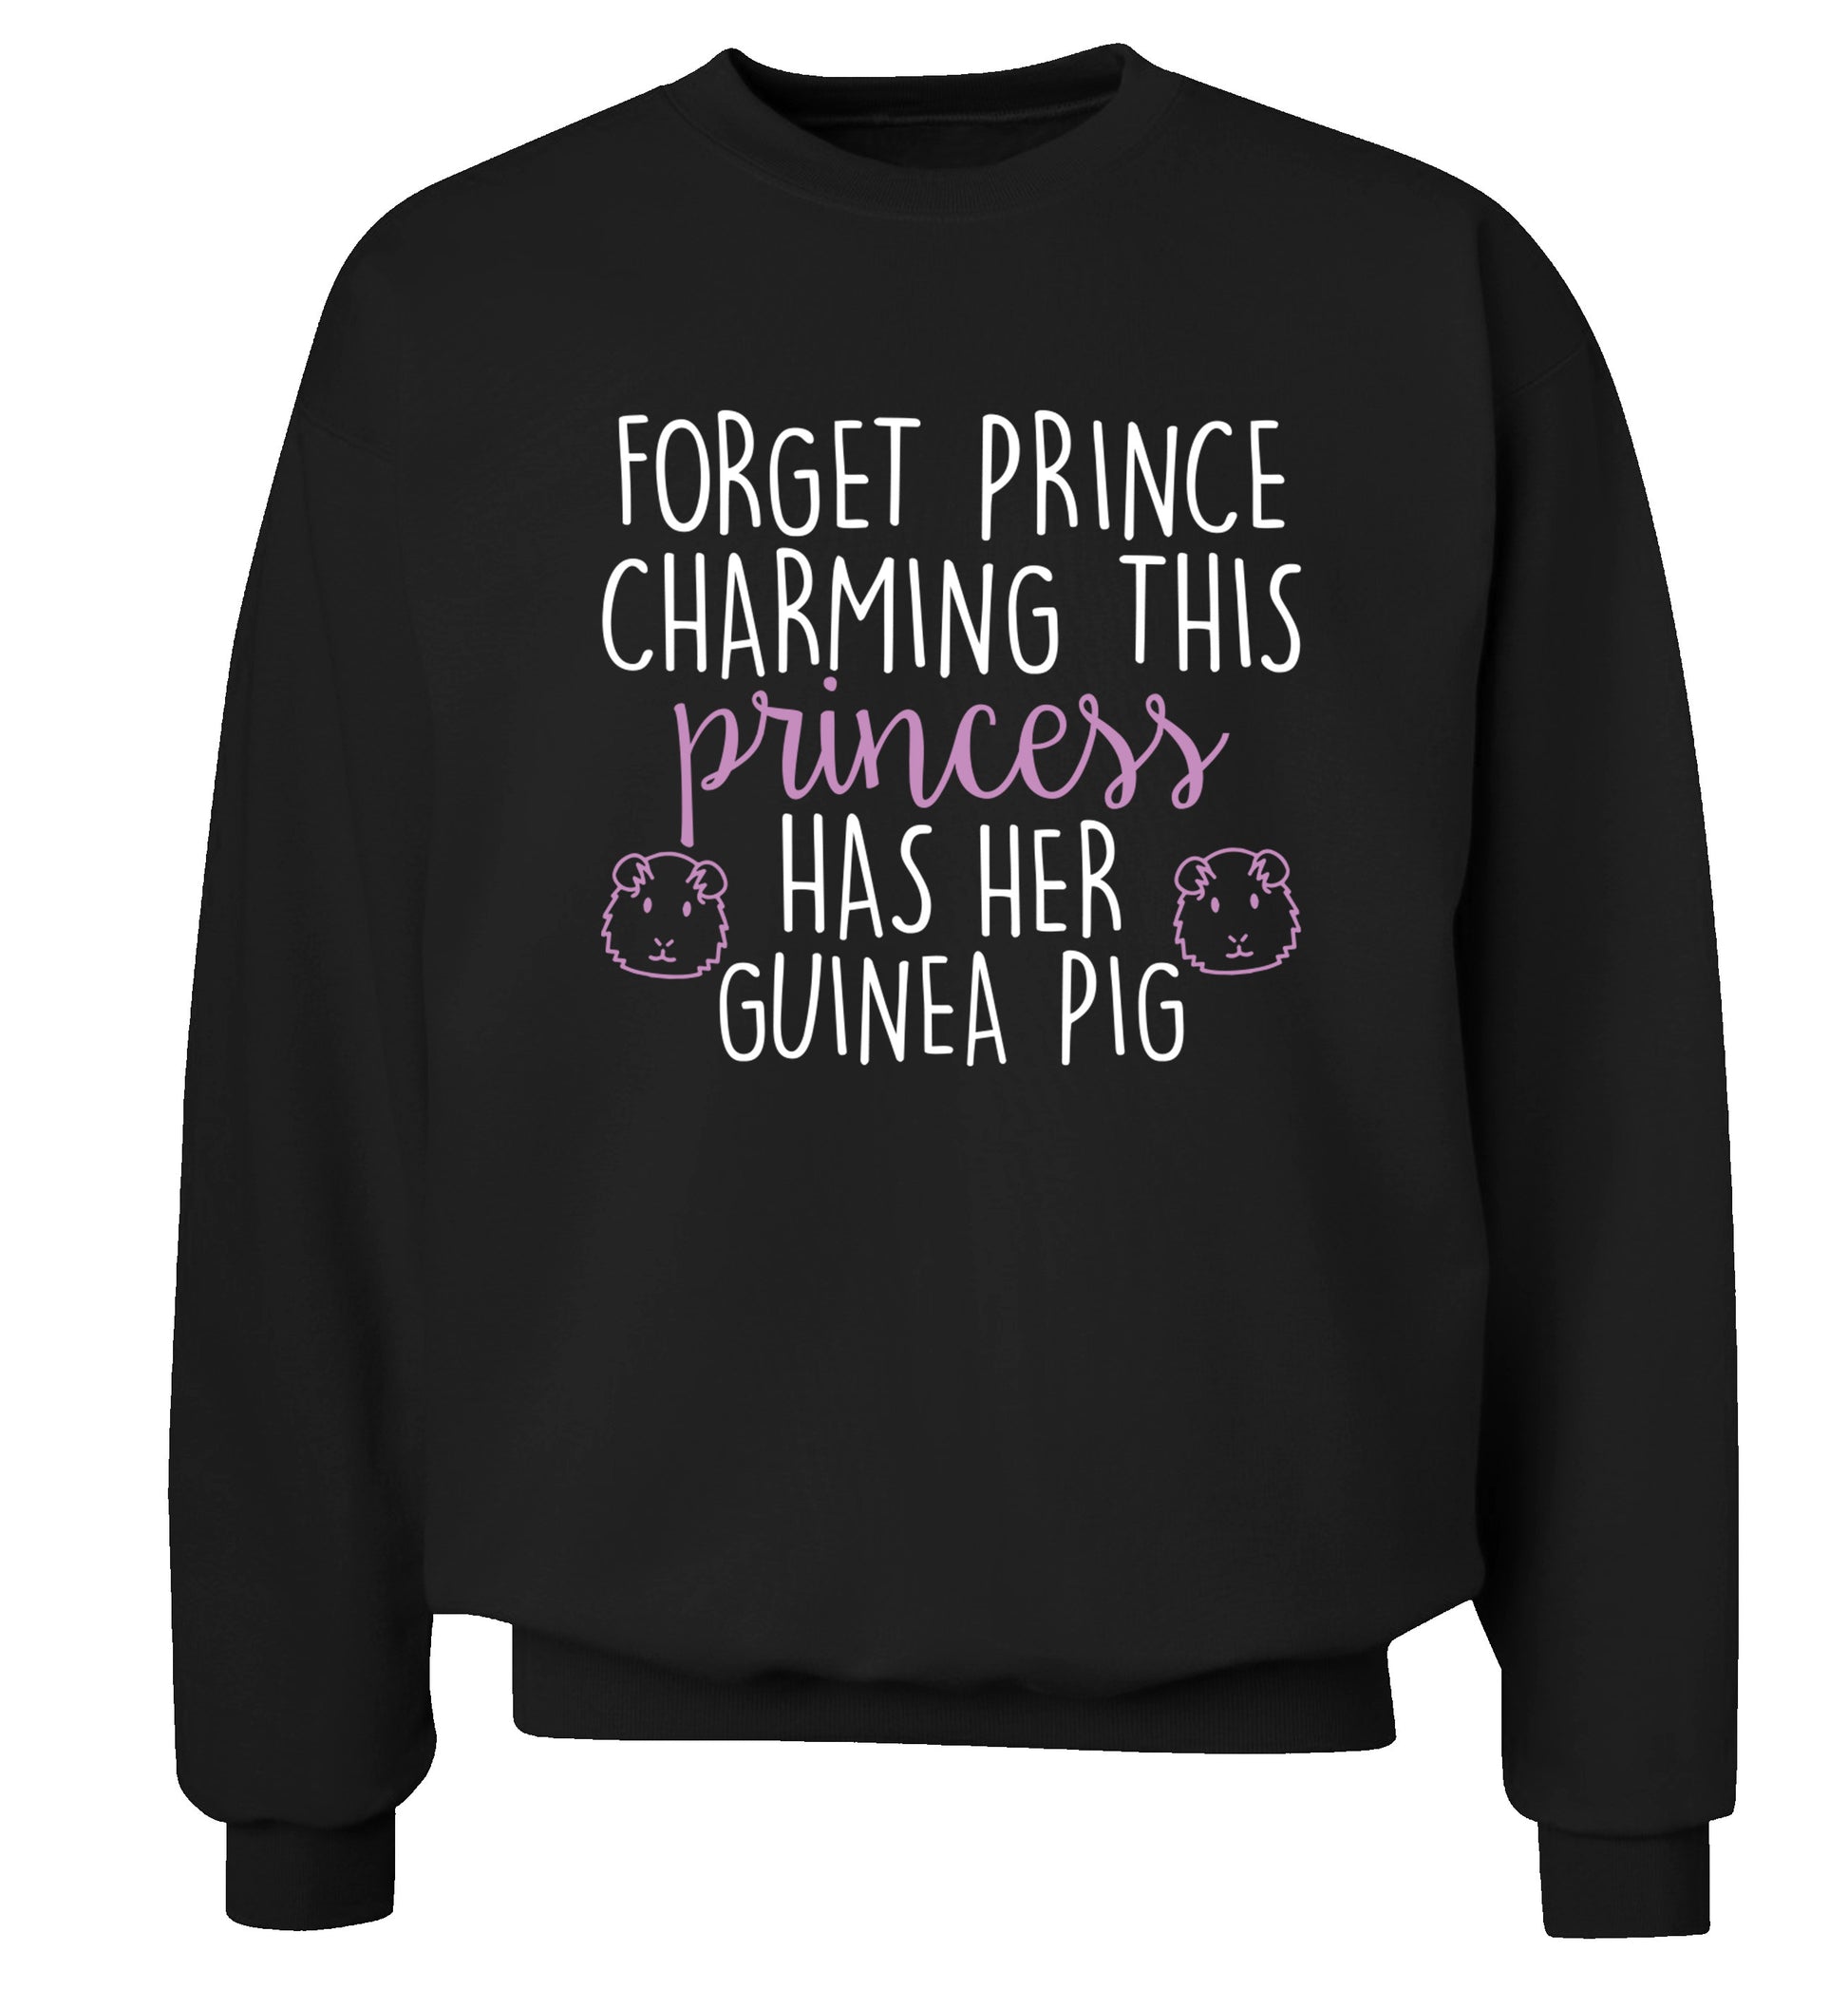 Forget prince charming, I have my guinea pig Adult's unisex black  sweater 2XL